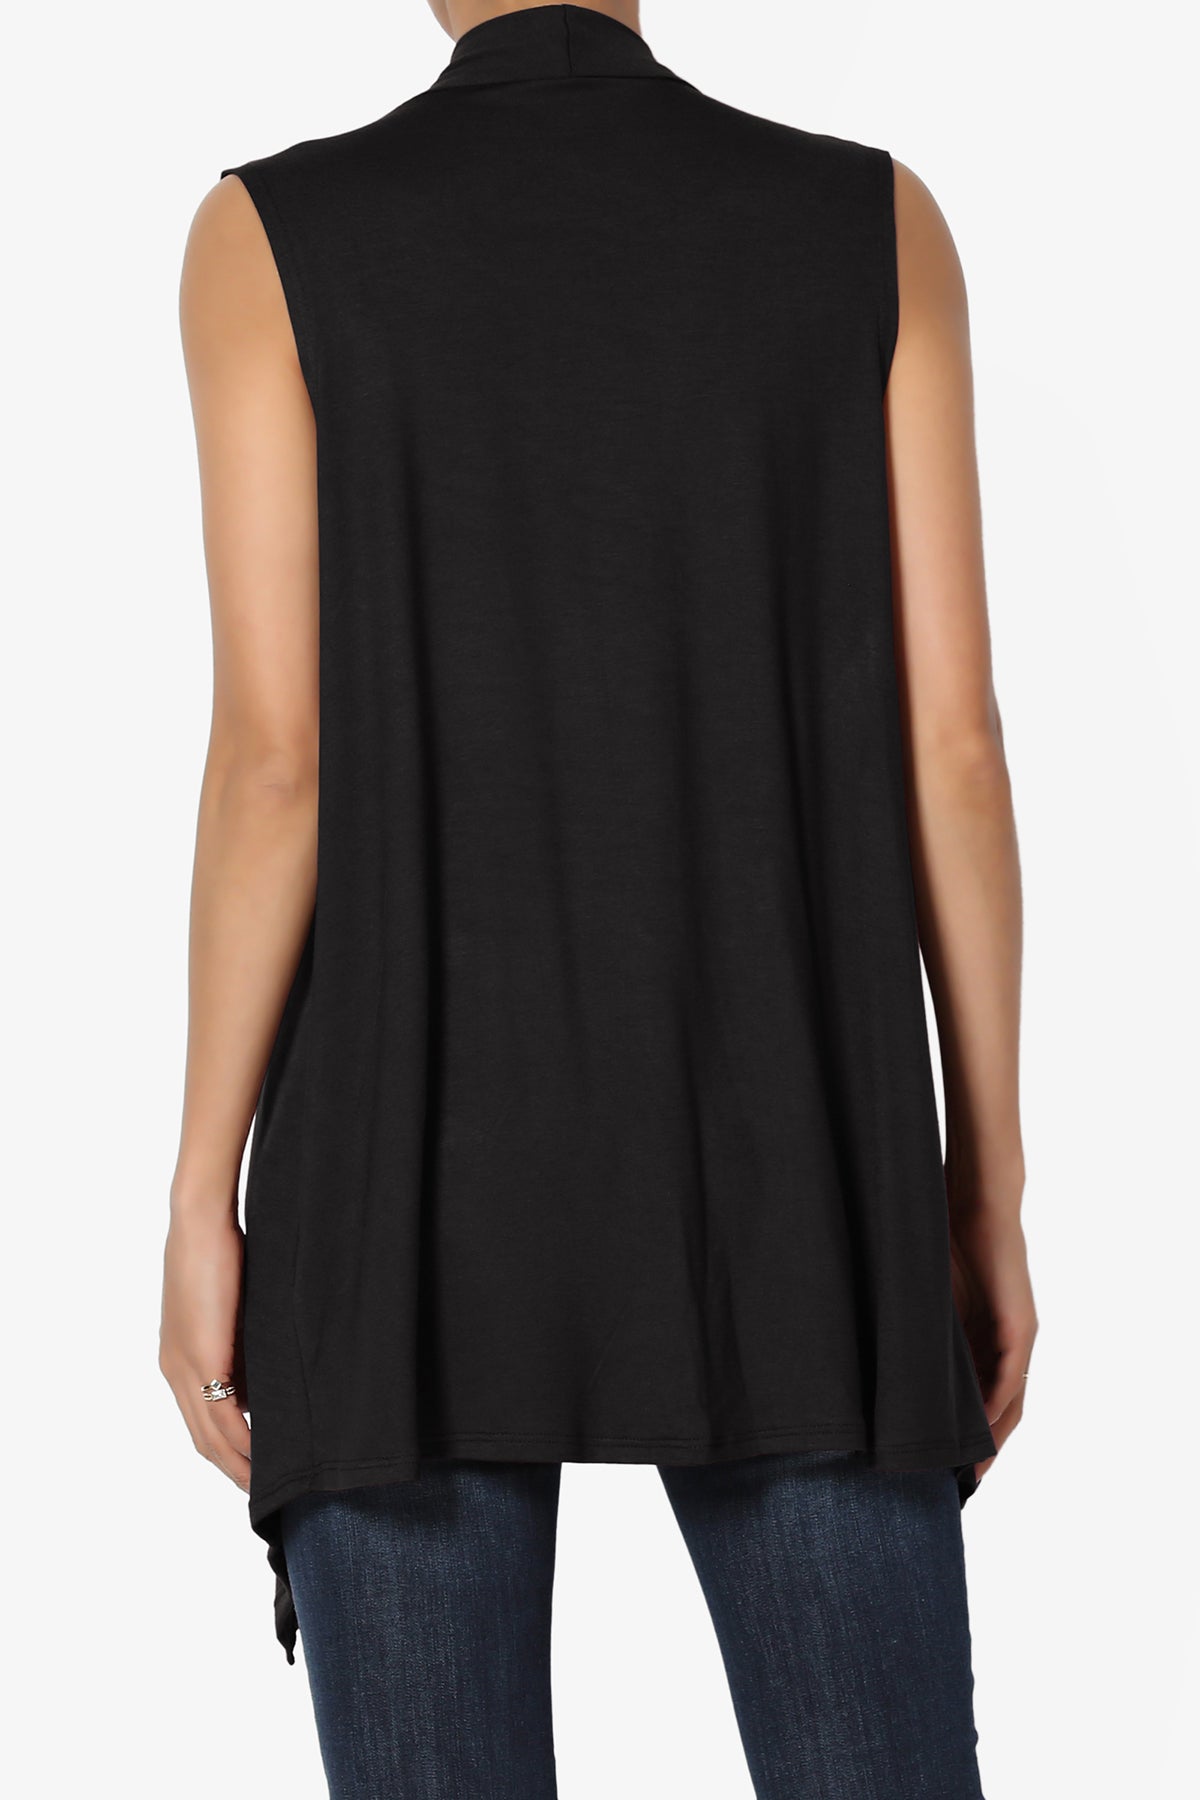 Load image into Gallery viewer, Danna Draped Jersey Vest BLACK_2
